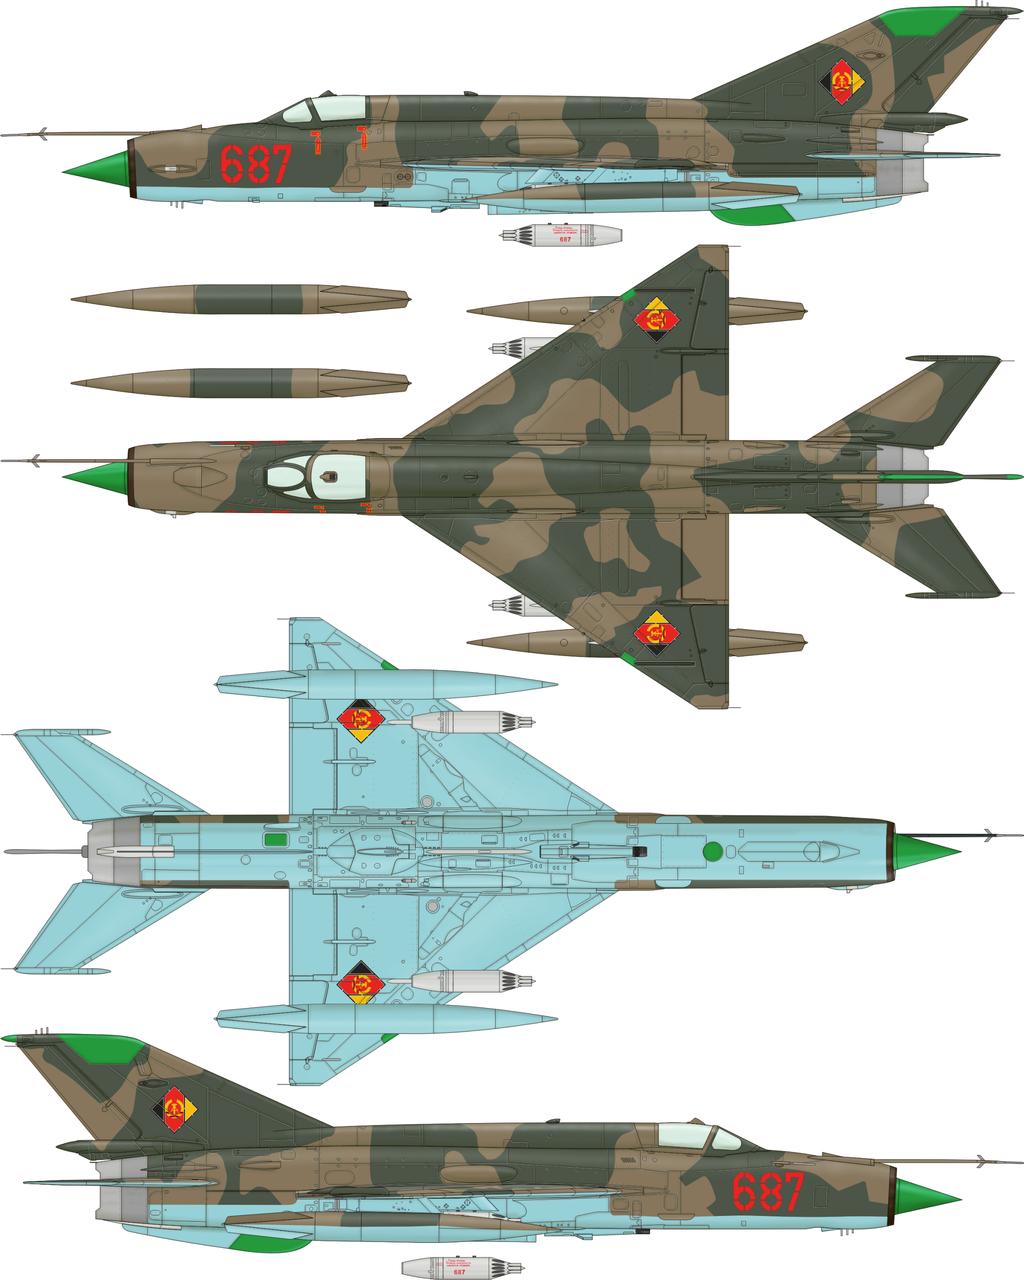 F MiG-21 MF,German Democratic Republic, Jagdfliegergeschwader, Preschen Airbase, 1990 Red 87 was assigned to JG- based at Preschen near the town of Forst through the eighties and into the nineties.